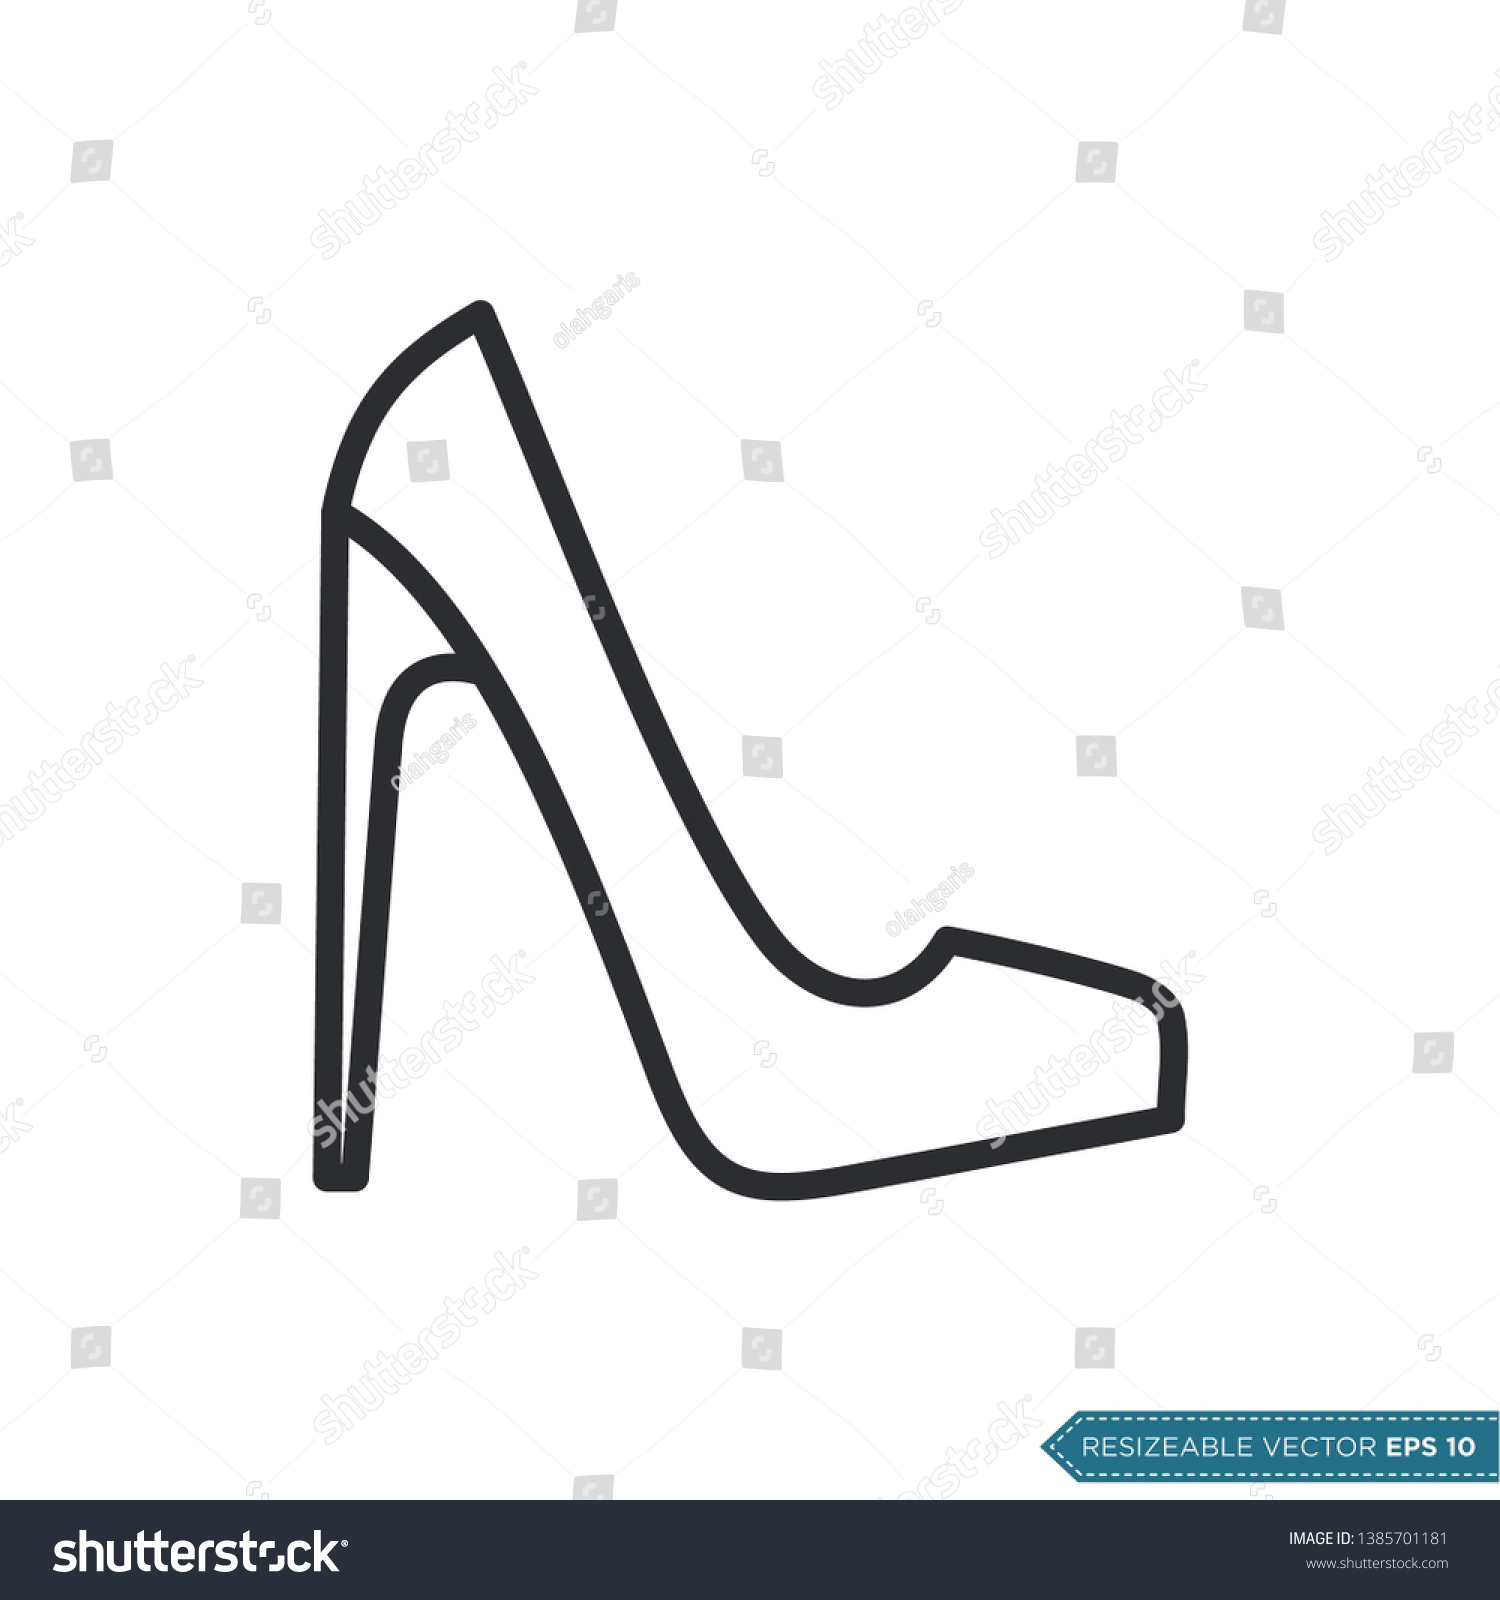 High Heels Women Shoe Icon Vector Stock Vector (Royalty Free Intended For High Heel Template For Cards